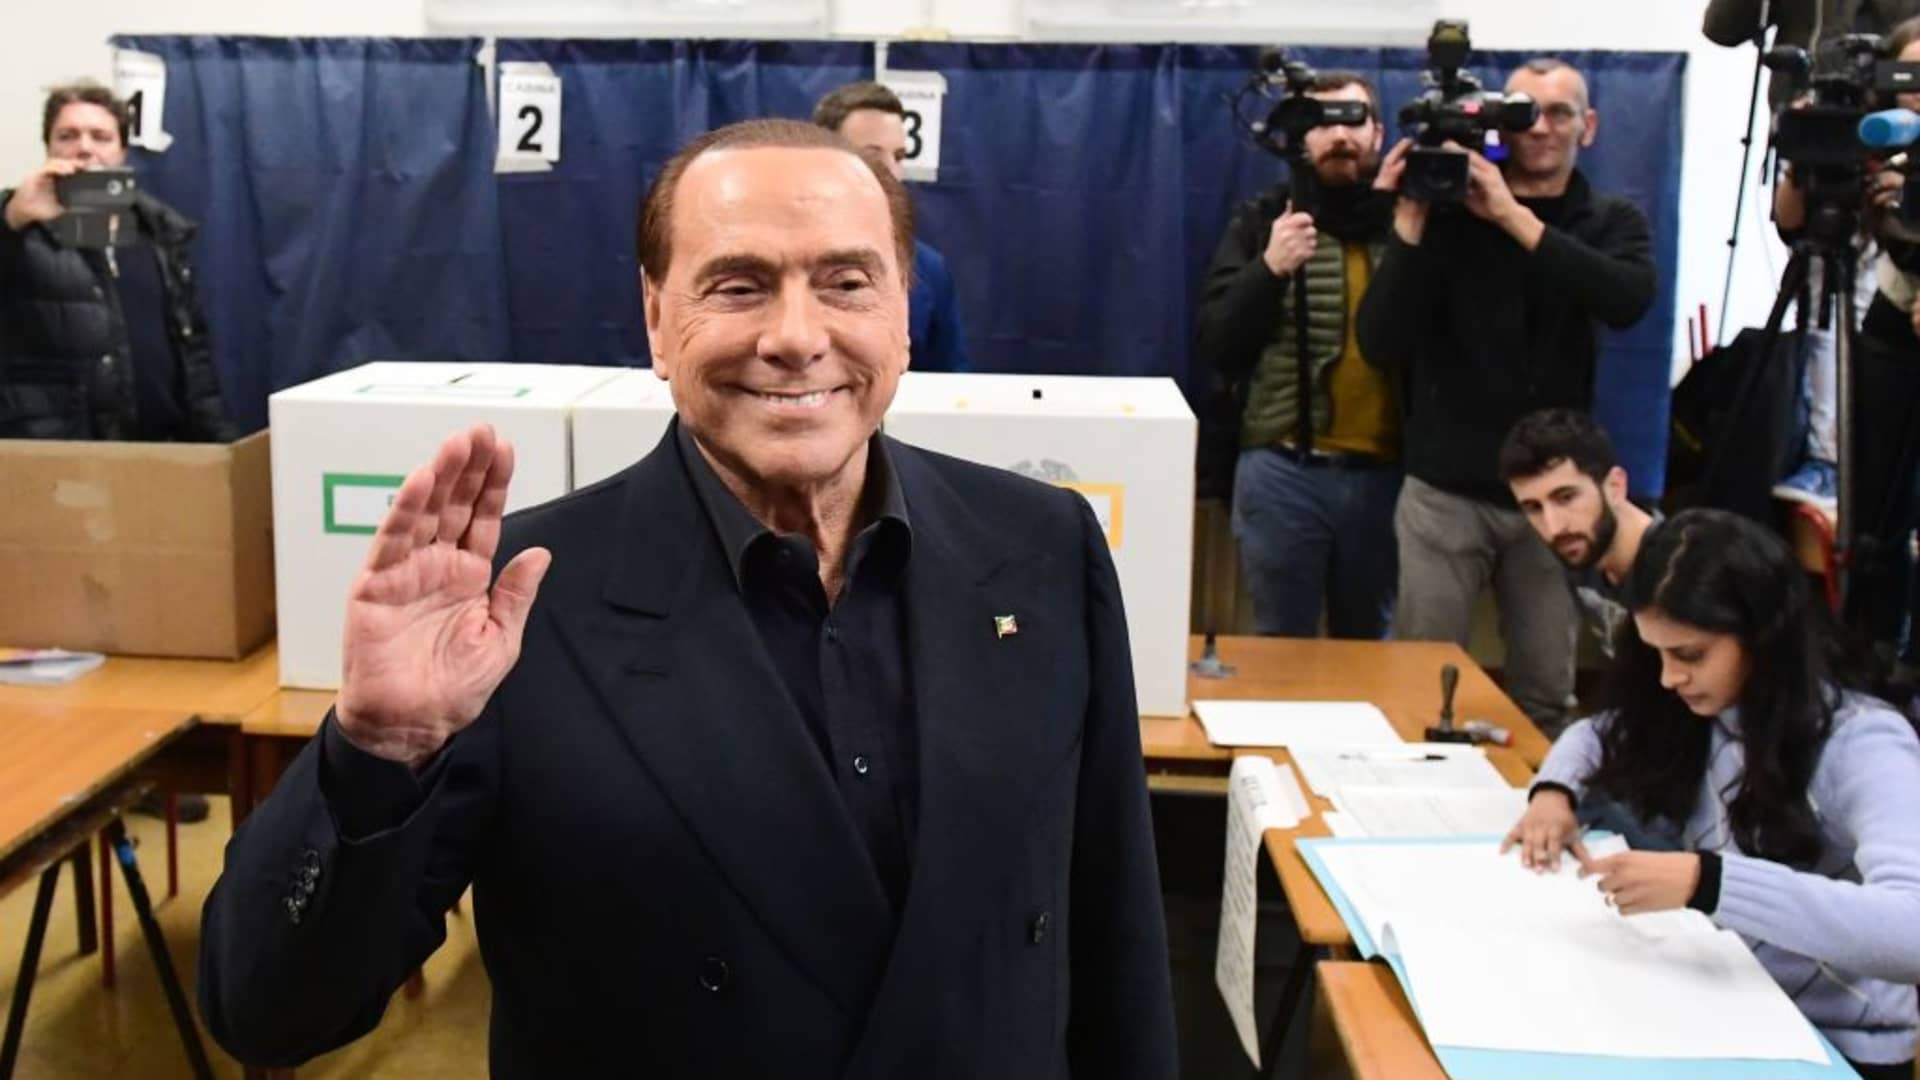 Silvio Berlusconi, leader of right-wing party Forza Italia, waves as he arrives to vote on March 4, 2018 at a polling station in Milan.